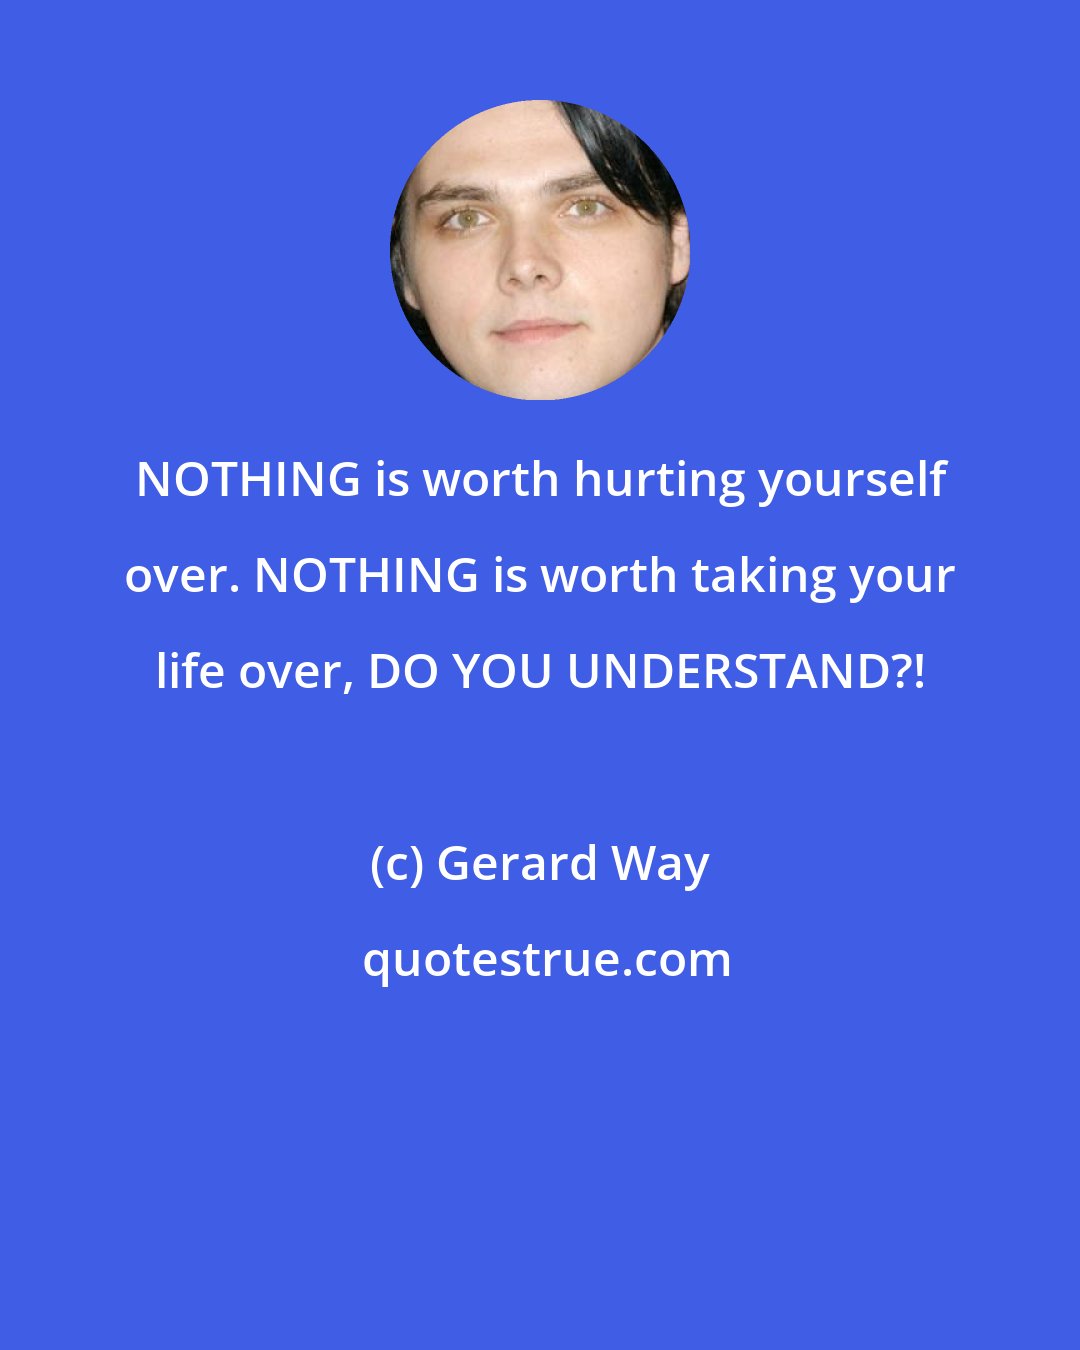 Gerard Way: NOTHING is worth hurting yourself over. NOTHING is worth taking your life over, DO YOU UNDERSTAND?!